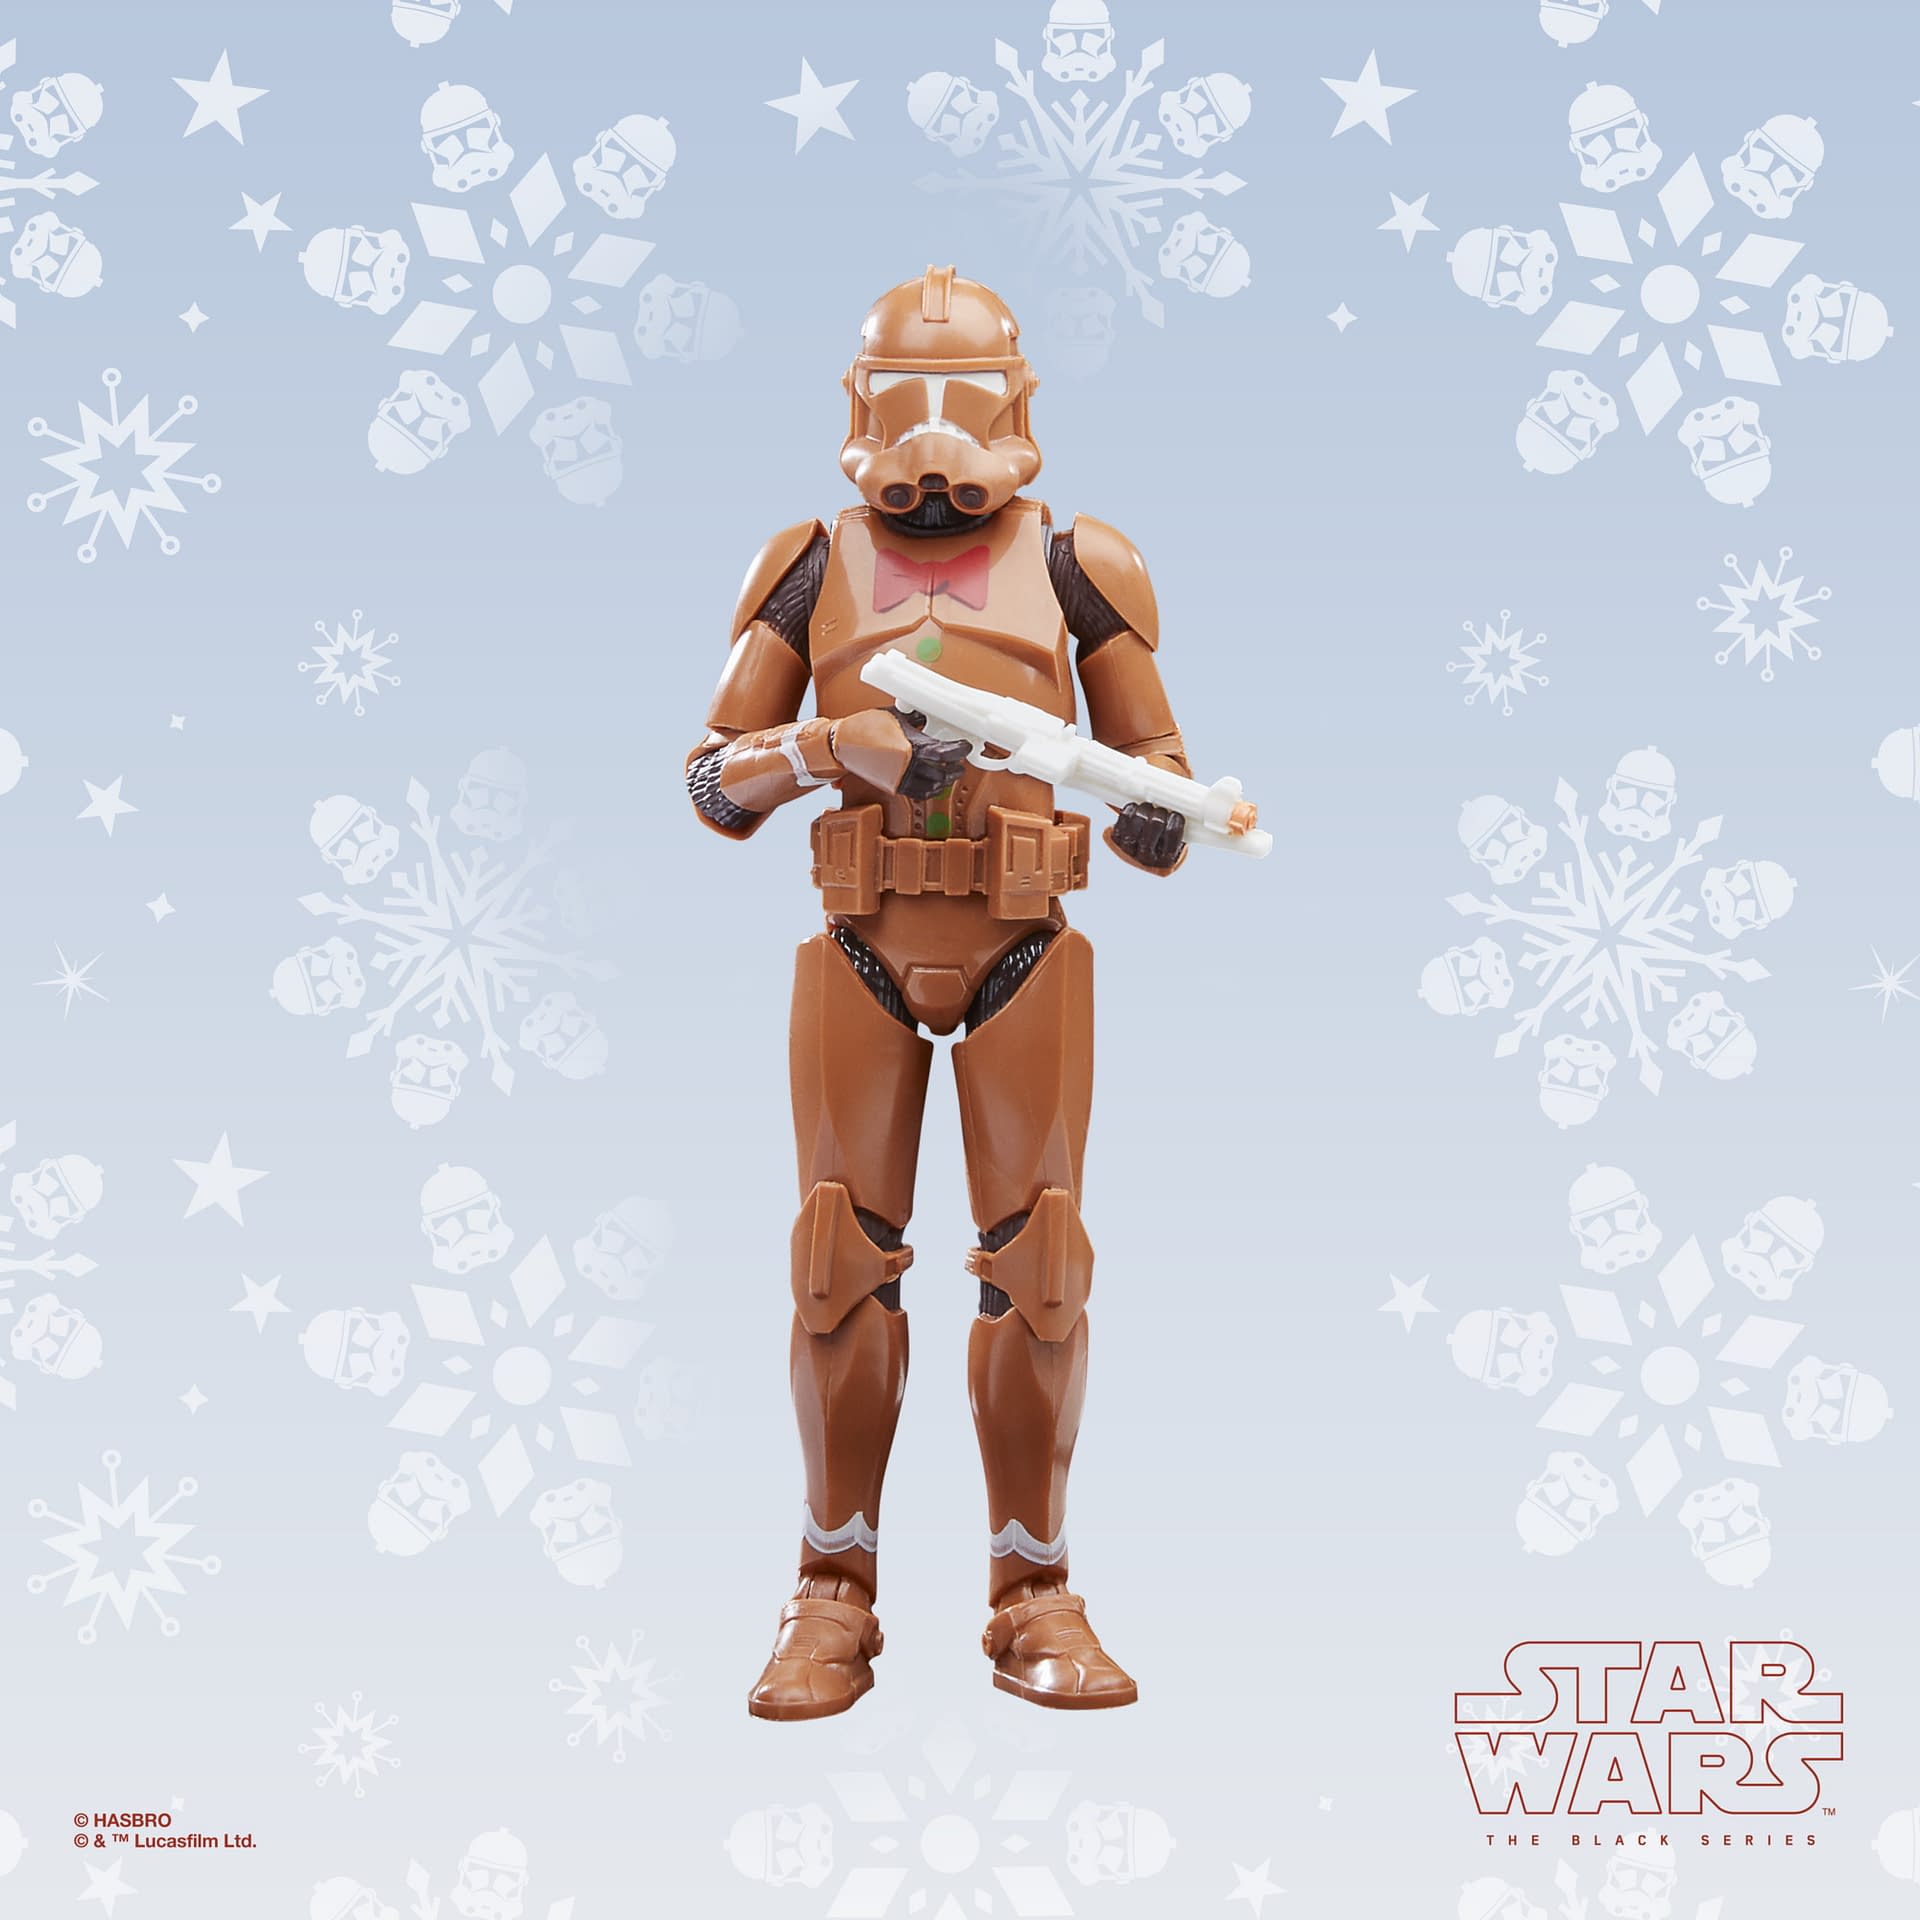 Star Wars Gingerbread Clone Trooper is Ready for Frosting with Hasbro